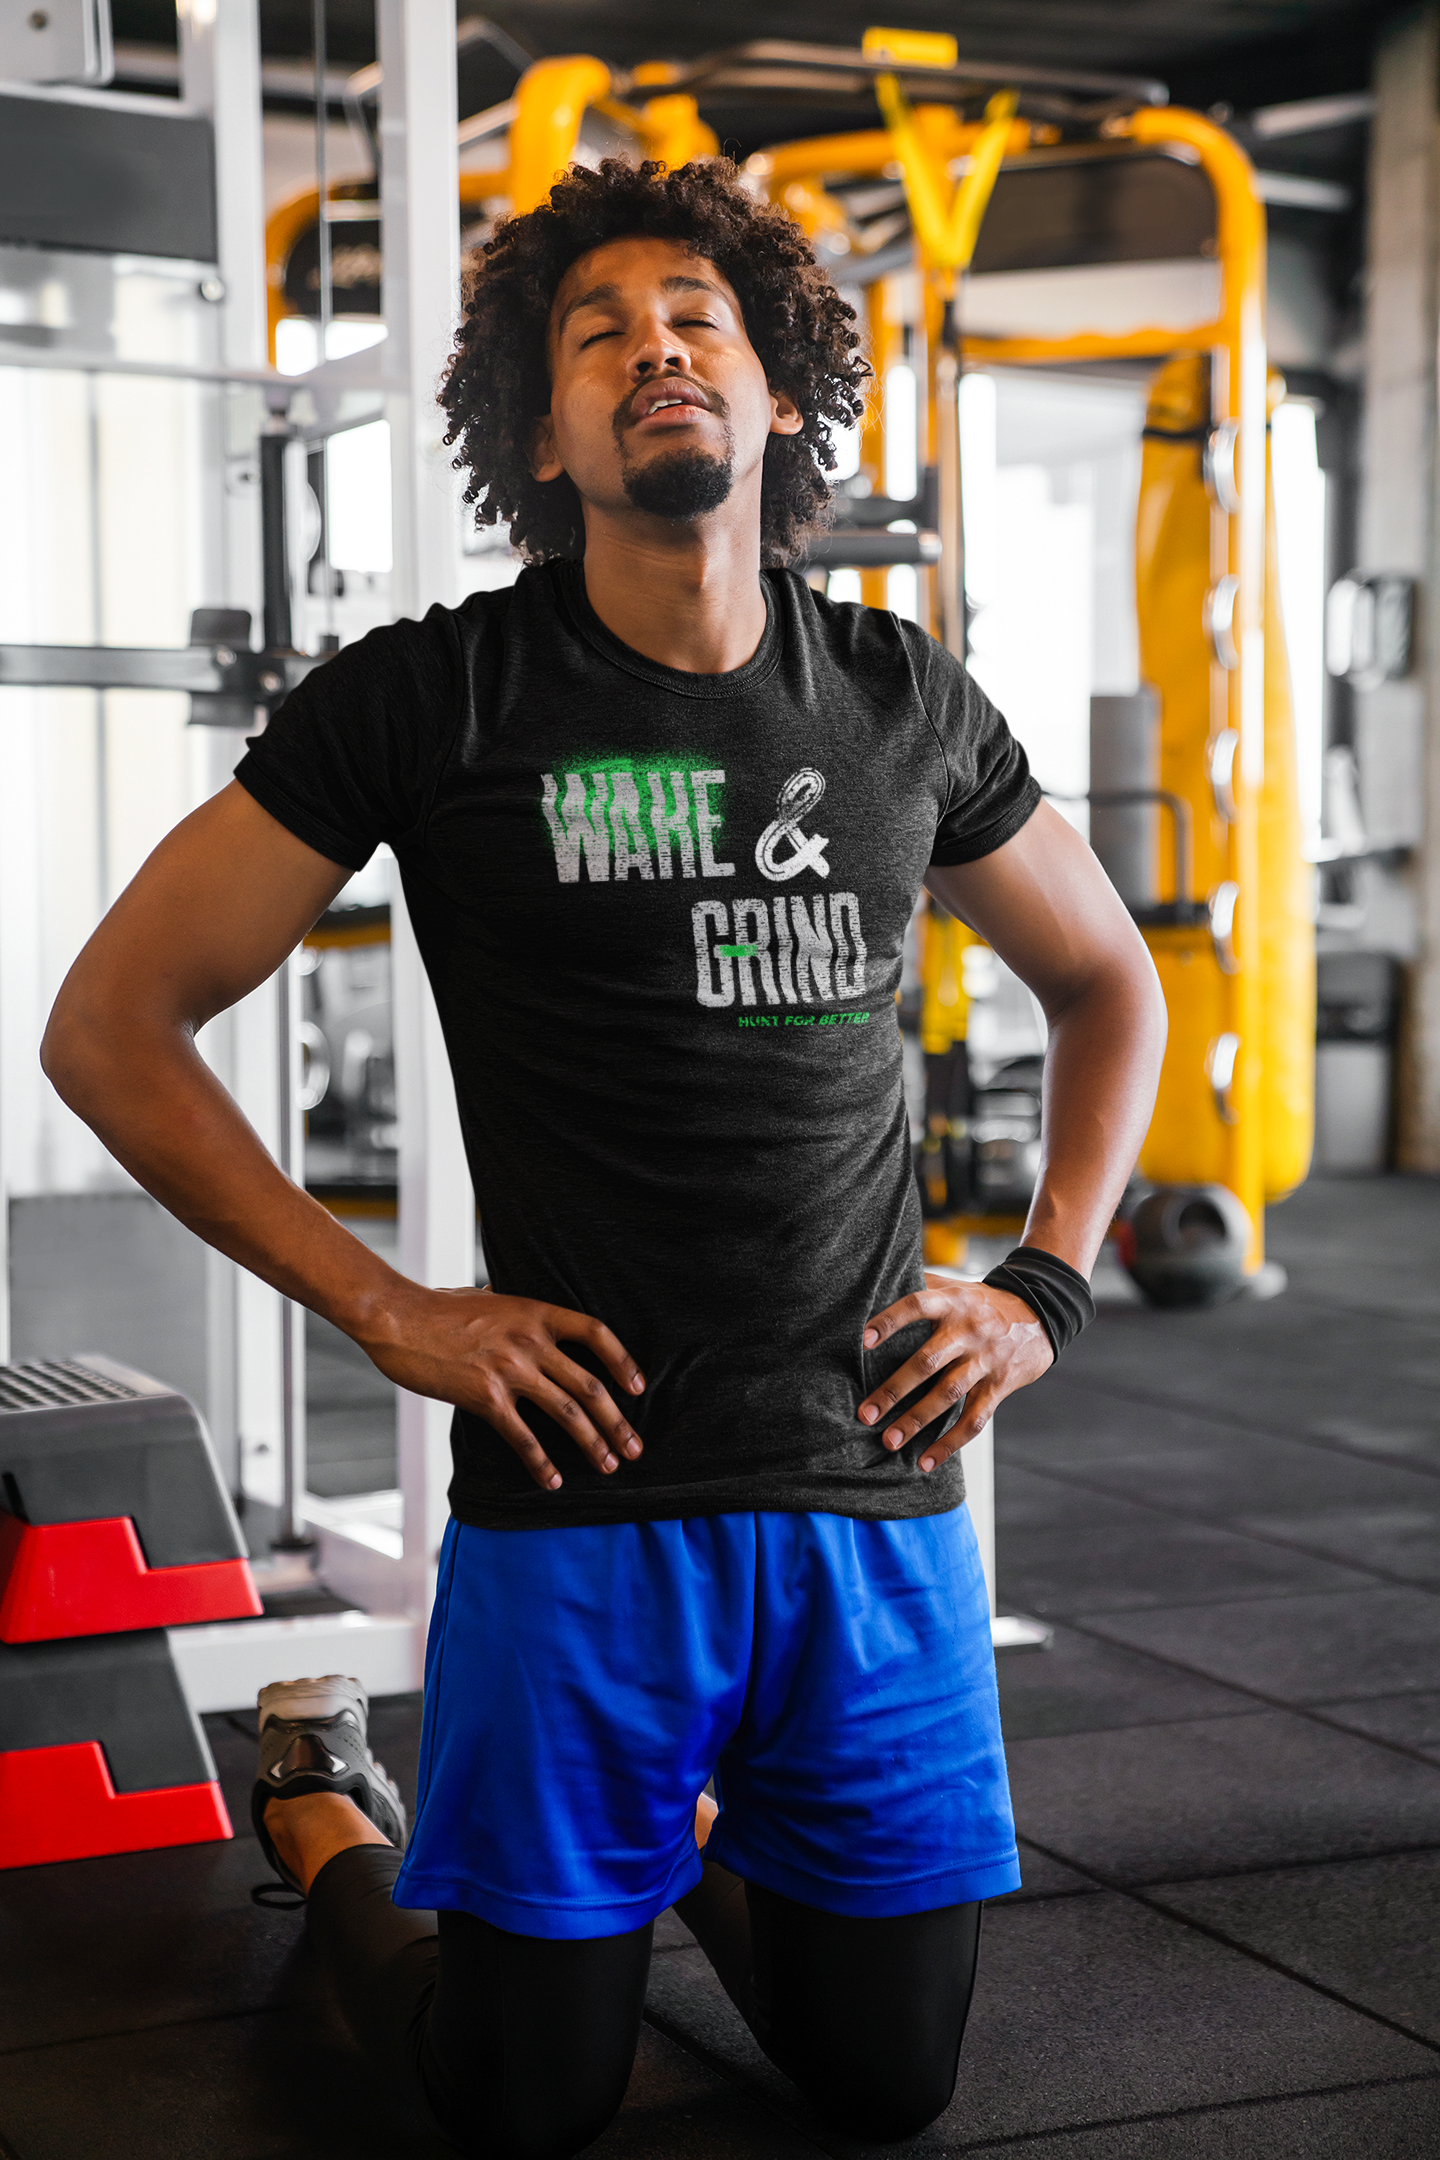 Deter To the truth Unlike WAKE & GRIND Tri-Blend Fitted Workout T-Shirt